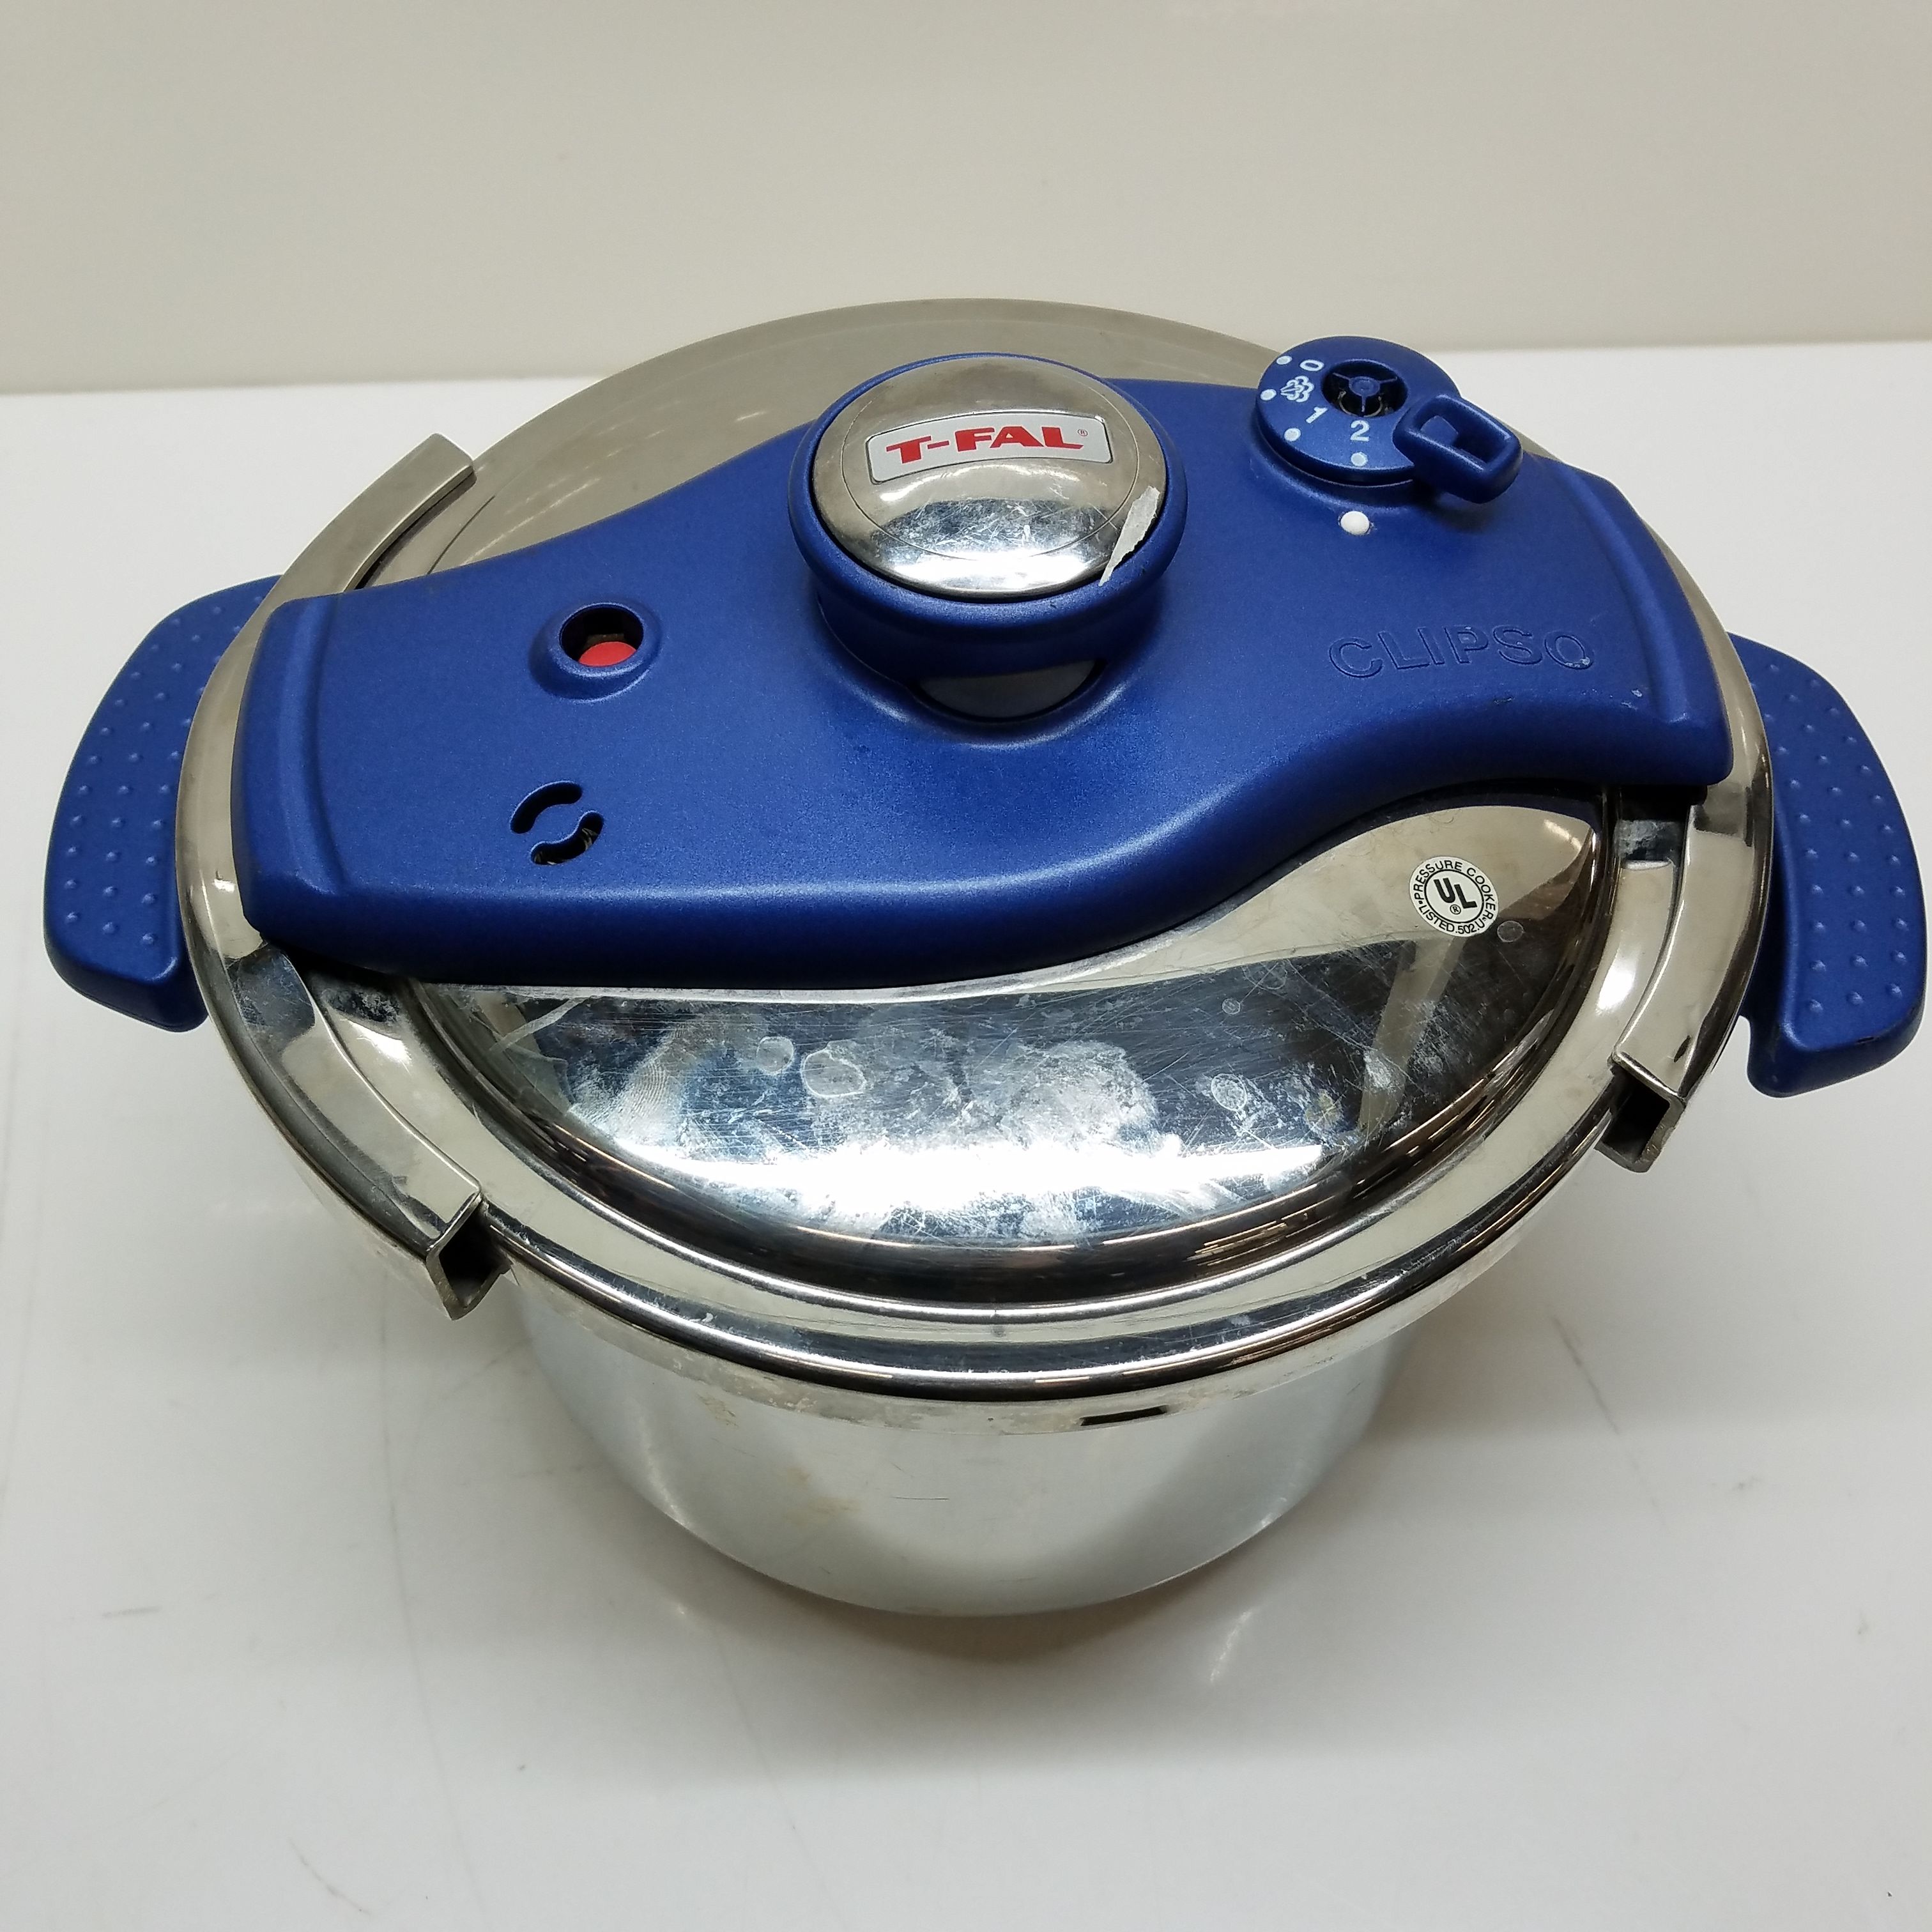 TFAL CLIPSO INOX 18-10 Stainless Steel Pressure Cooker 6L 6.3 QT